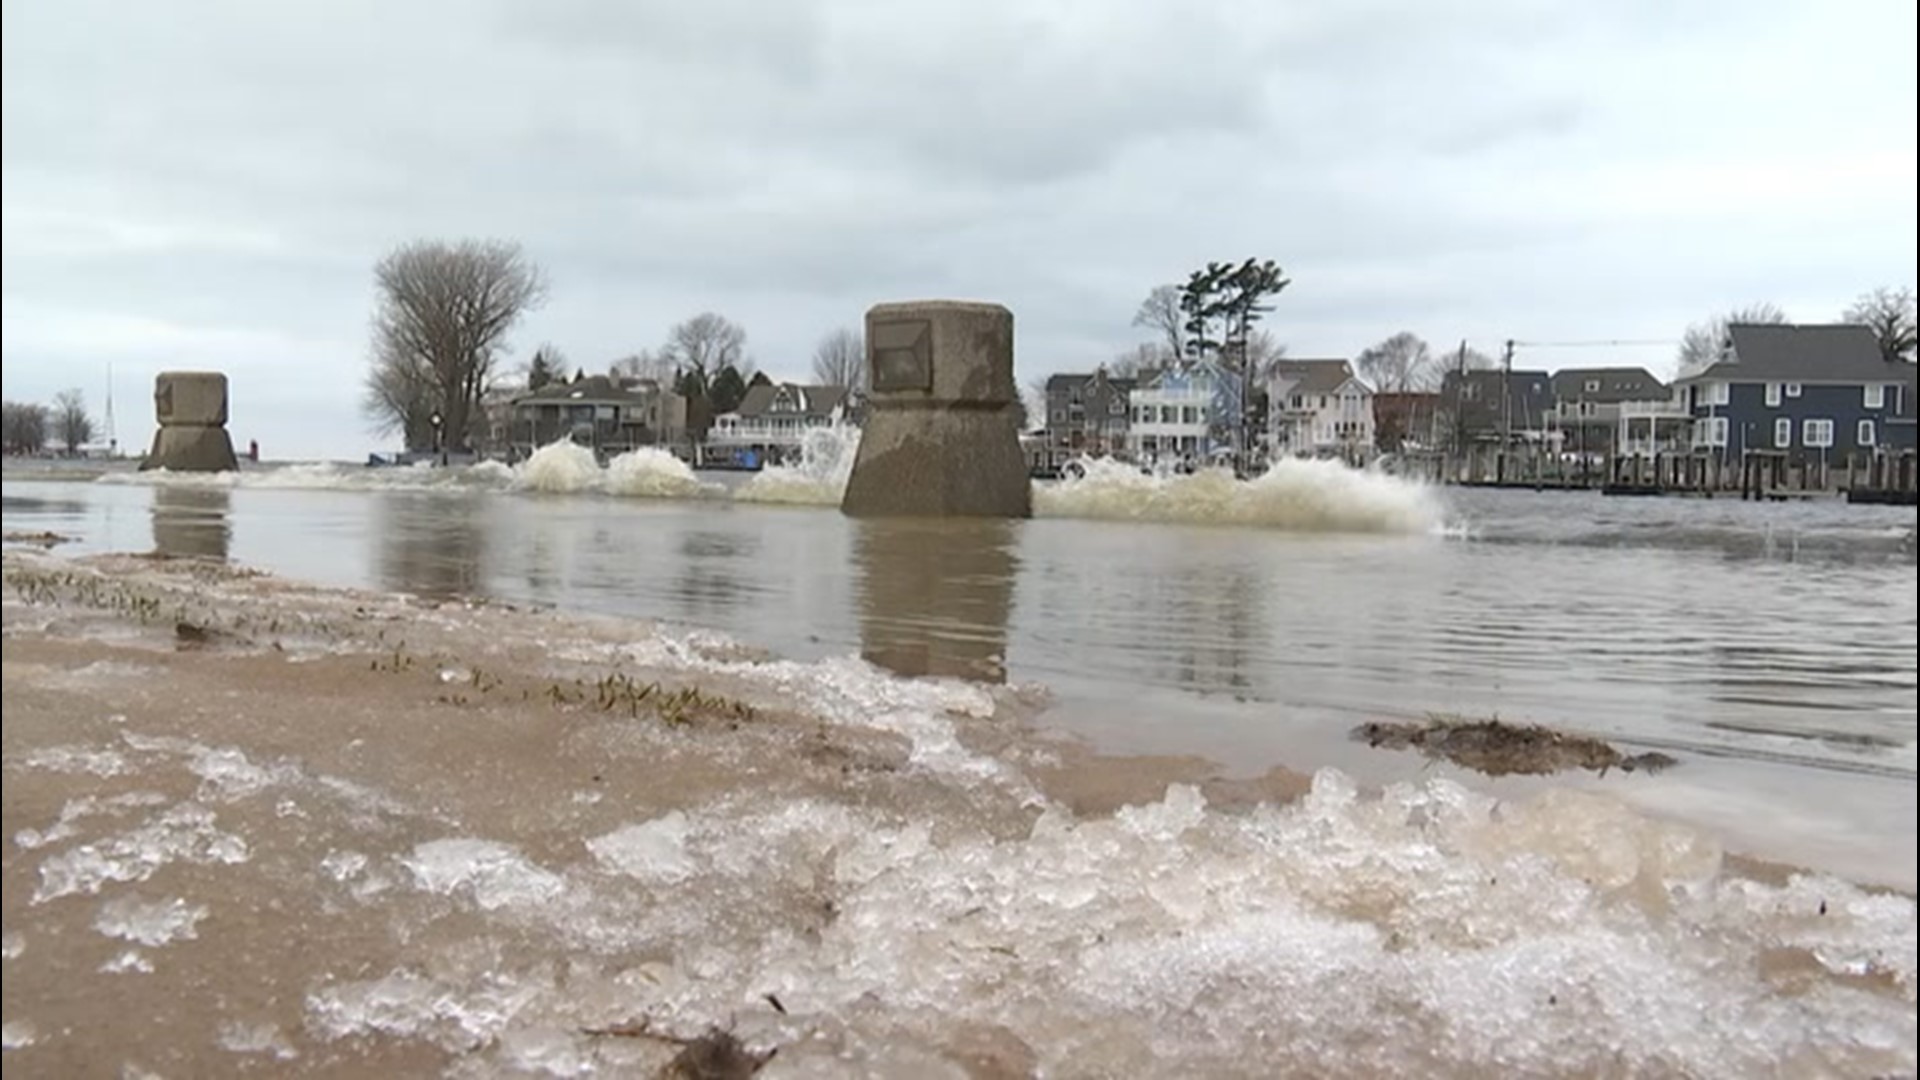 Lakeshore communities throughout the Great Lakes are facing serious economic challenges due to present high water levels, with increases forecast through the summer.